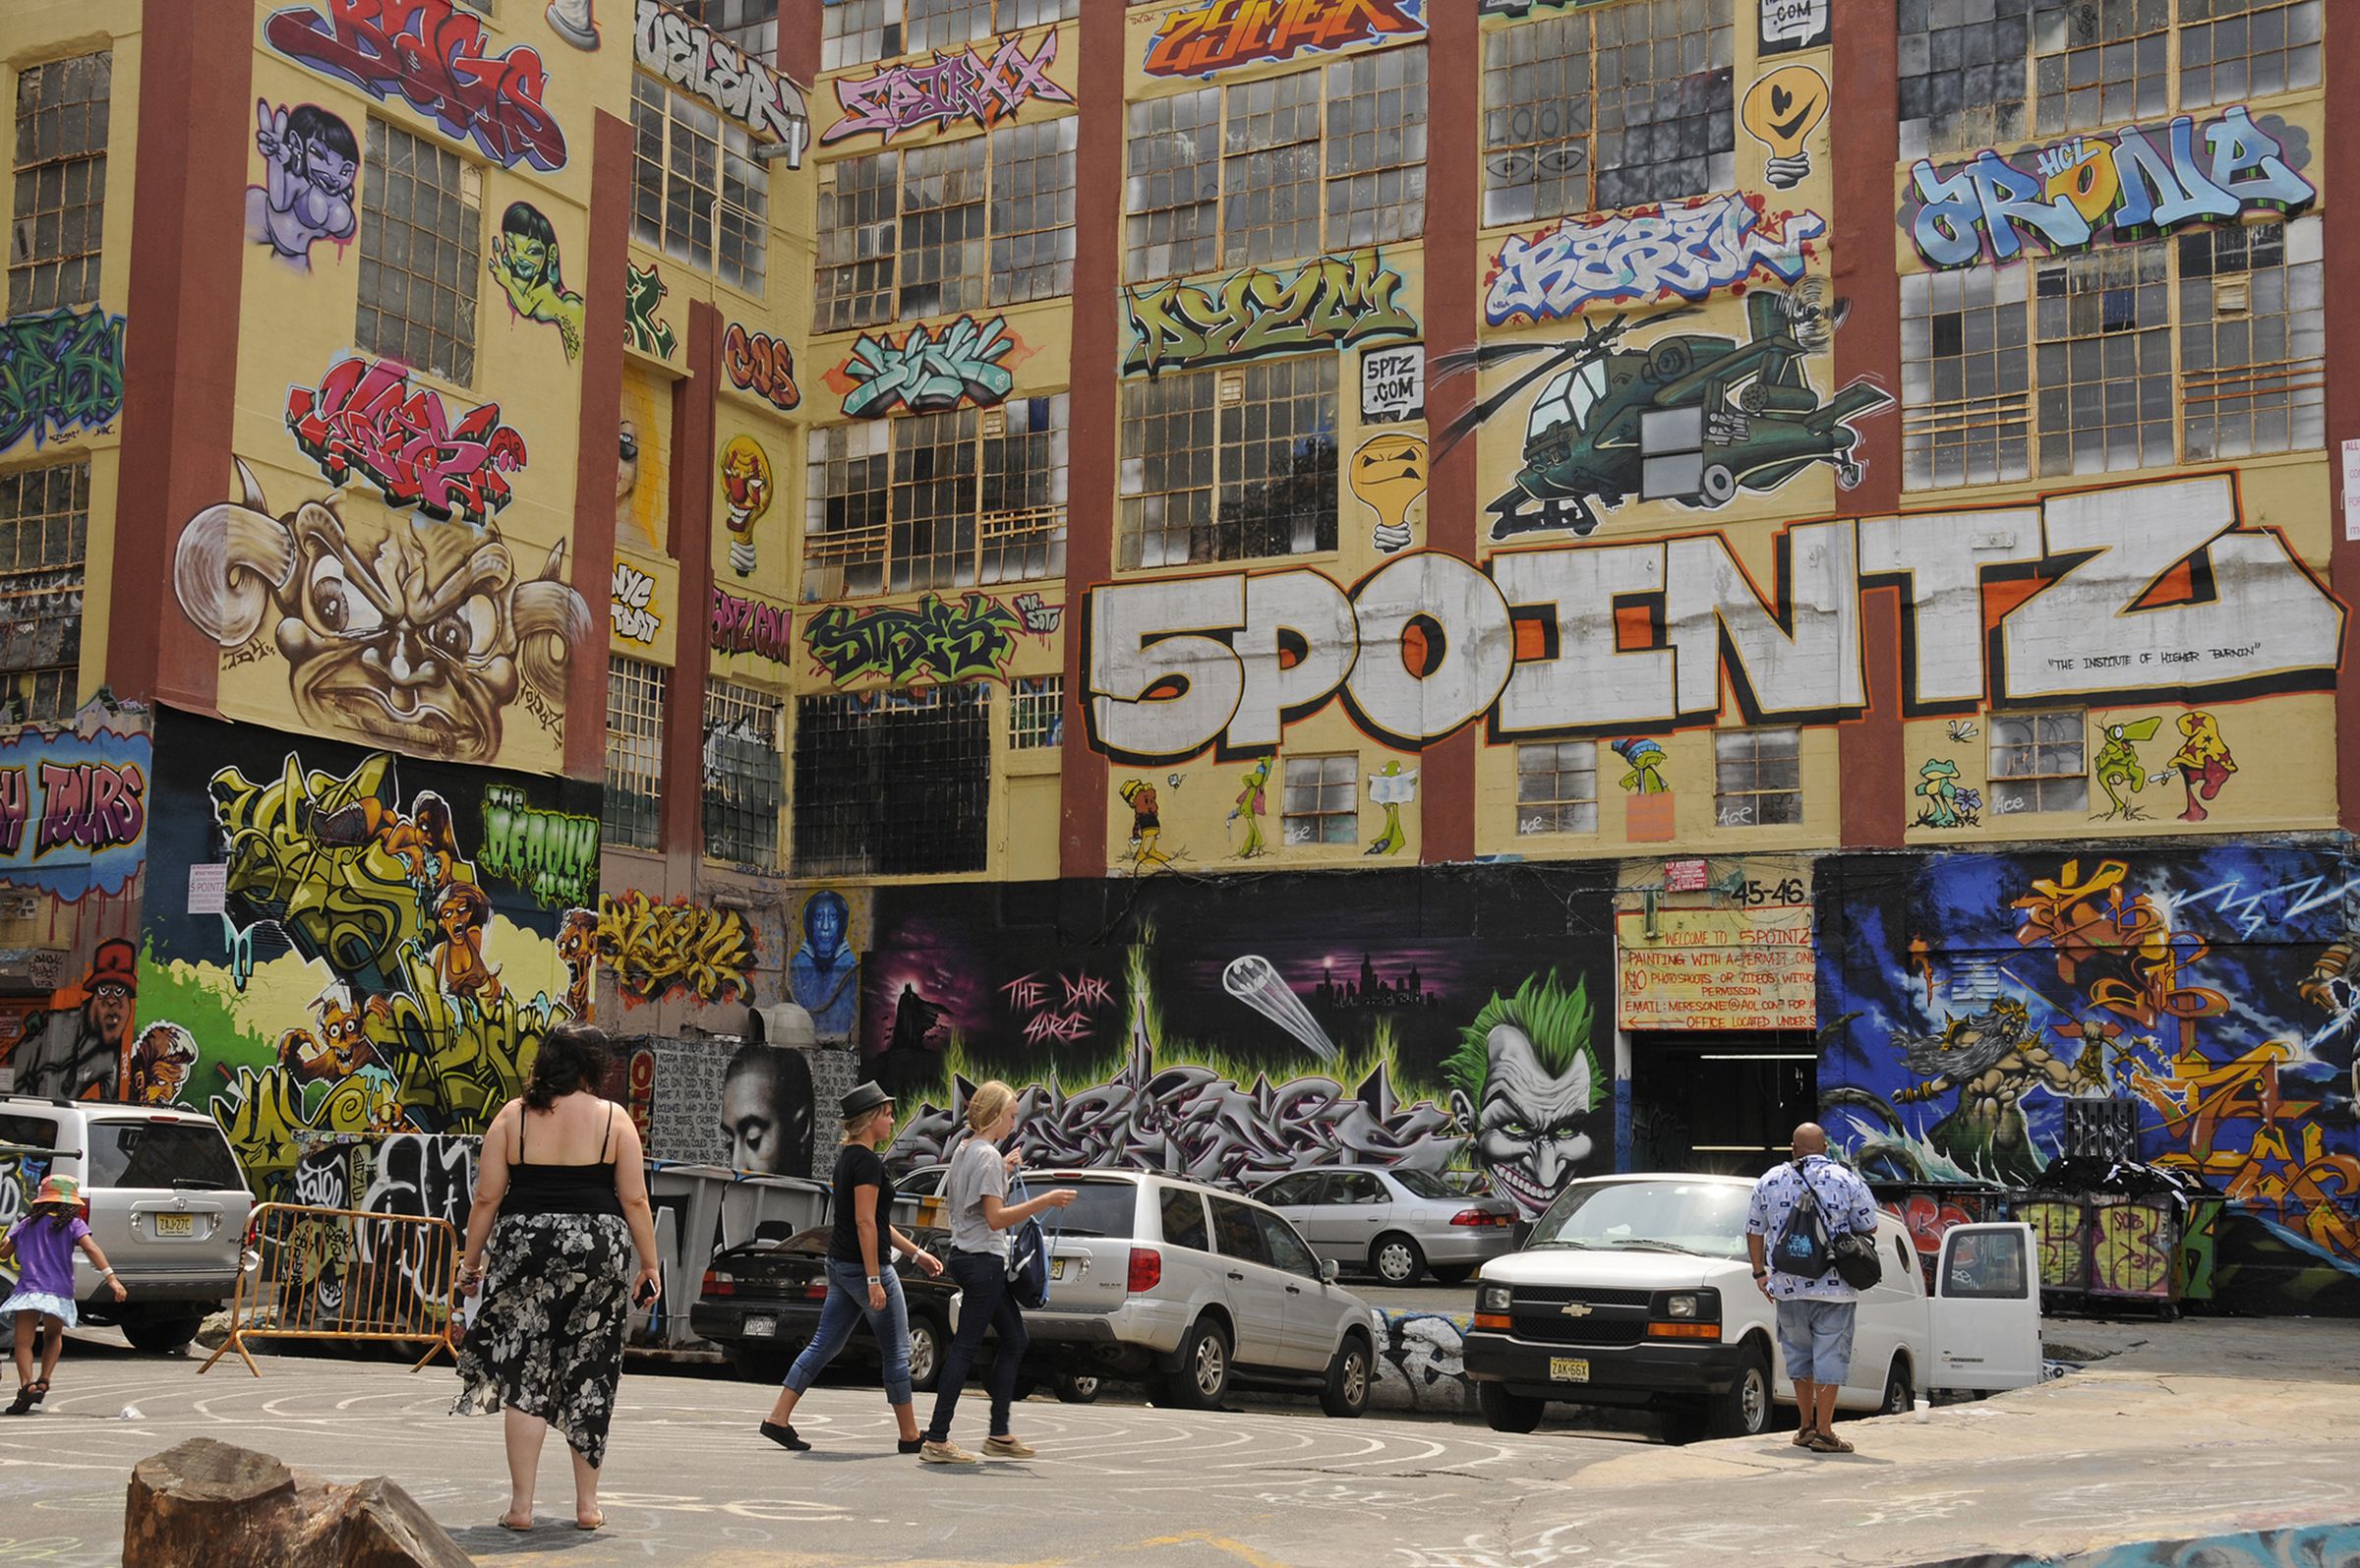 “5Pointz” was an outdoor art exhibit space for graffiti artists. 